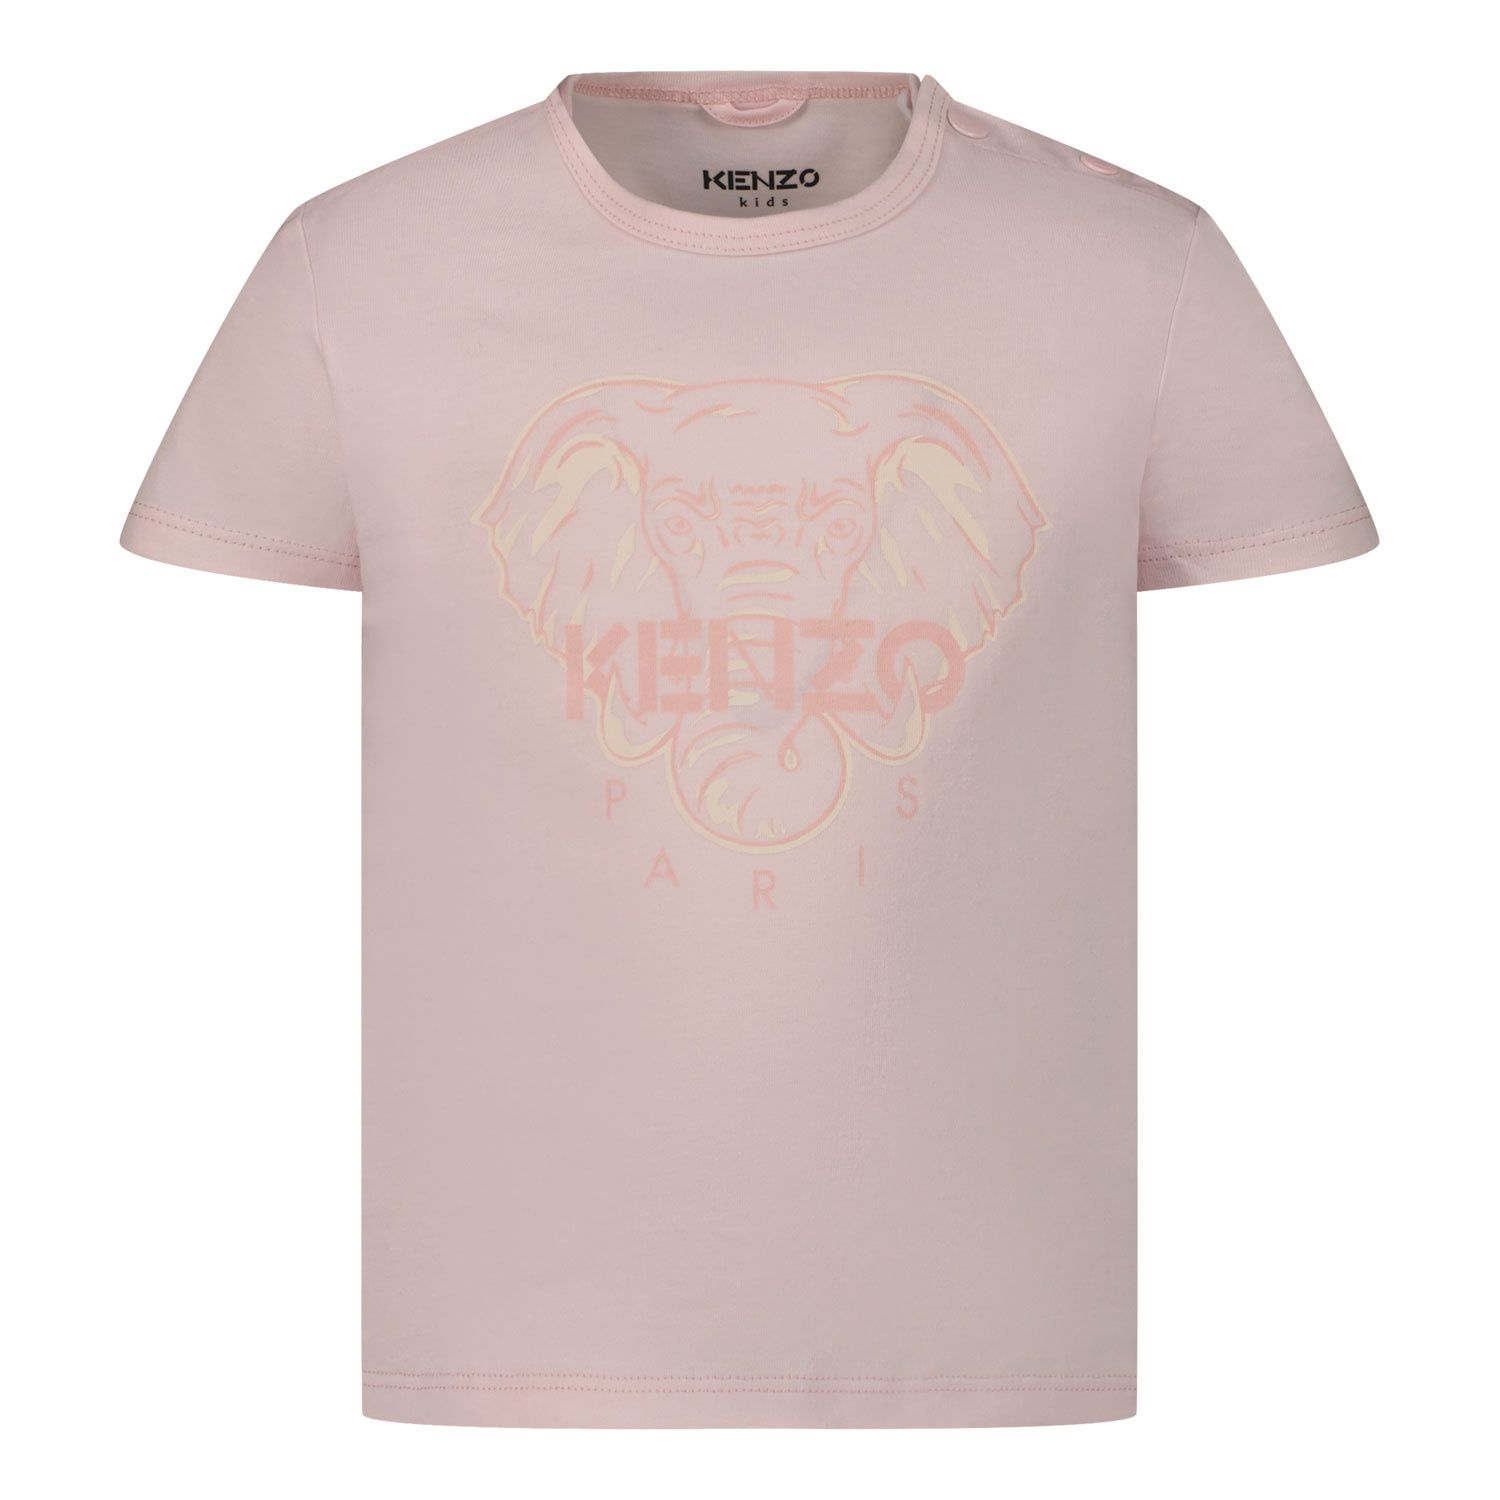 Picture of Kenzo K95075 baby shirt light pink